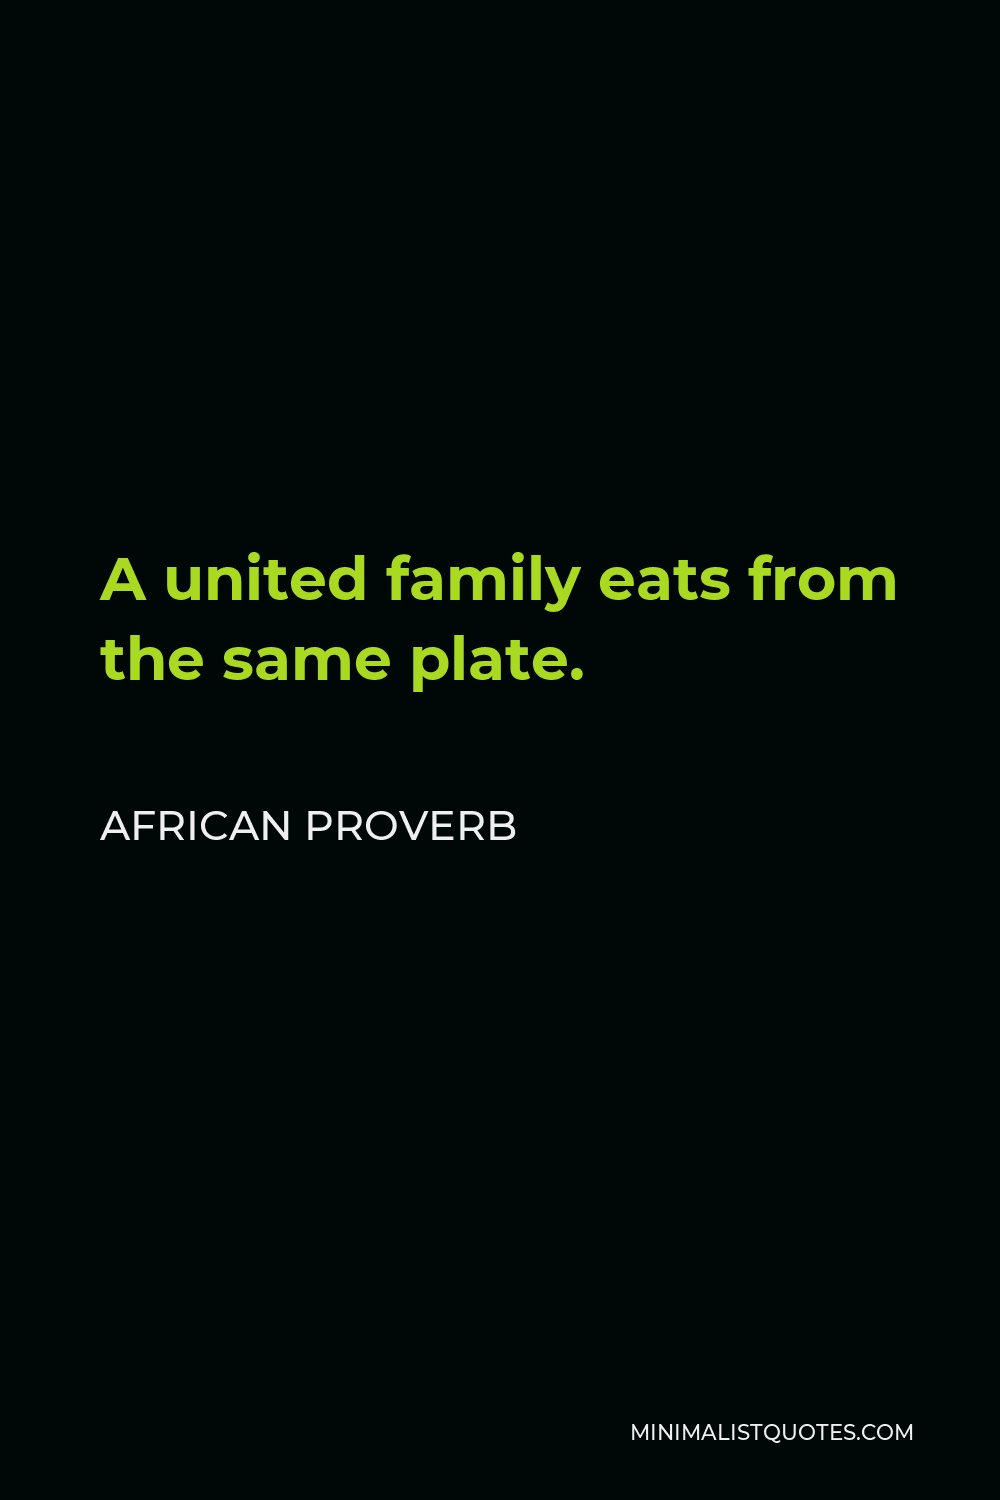 African Proverb Quote - A united family eats from the same plate.